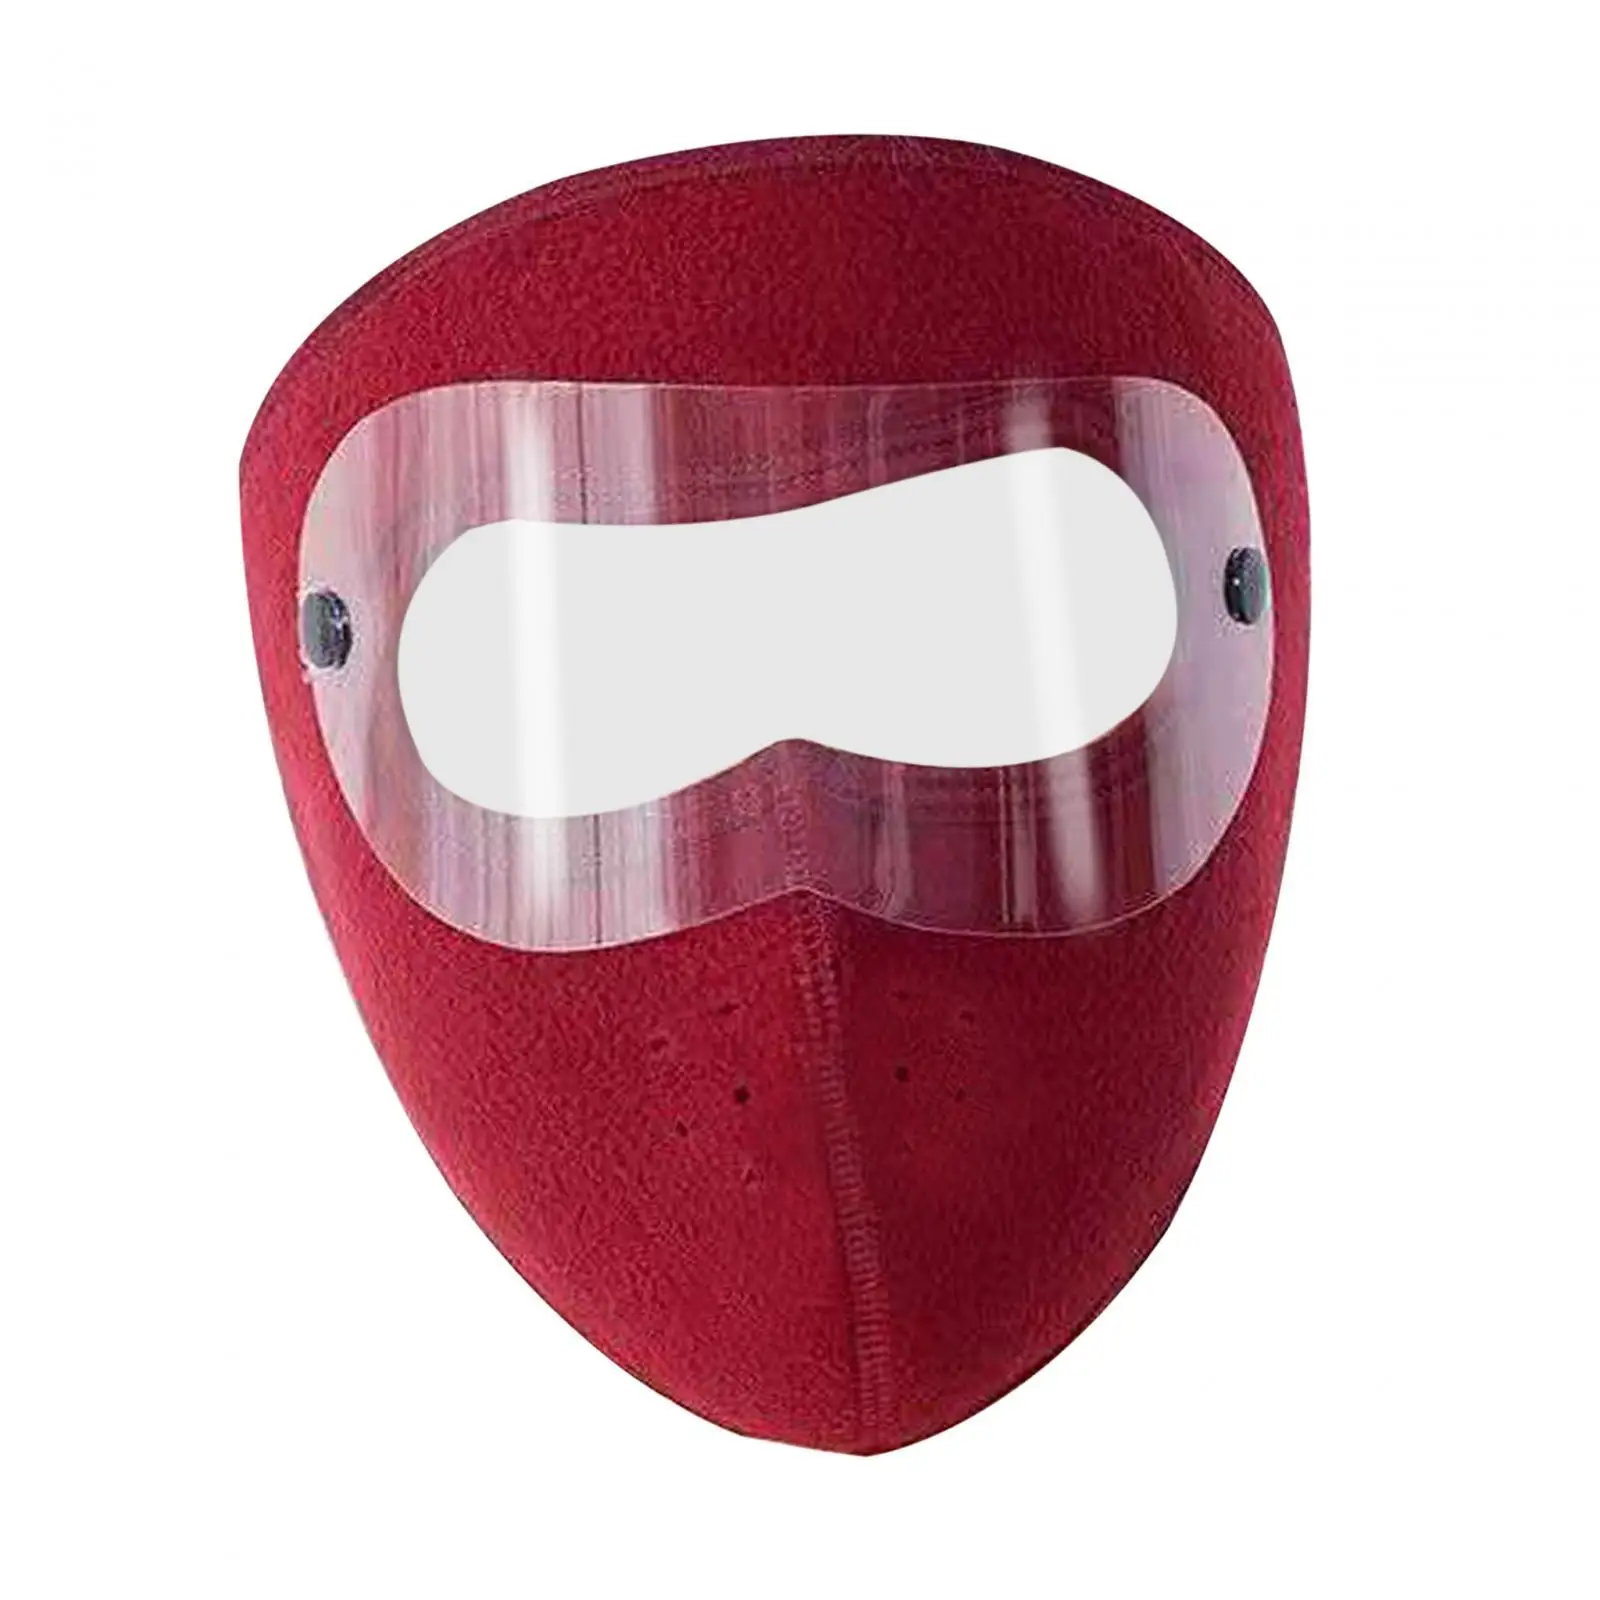 Winter Mask Thermal Breathable Reusable Full Face Mask Cold Weather Face Mask for Running Climbing Motorcycling Camping Hiking